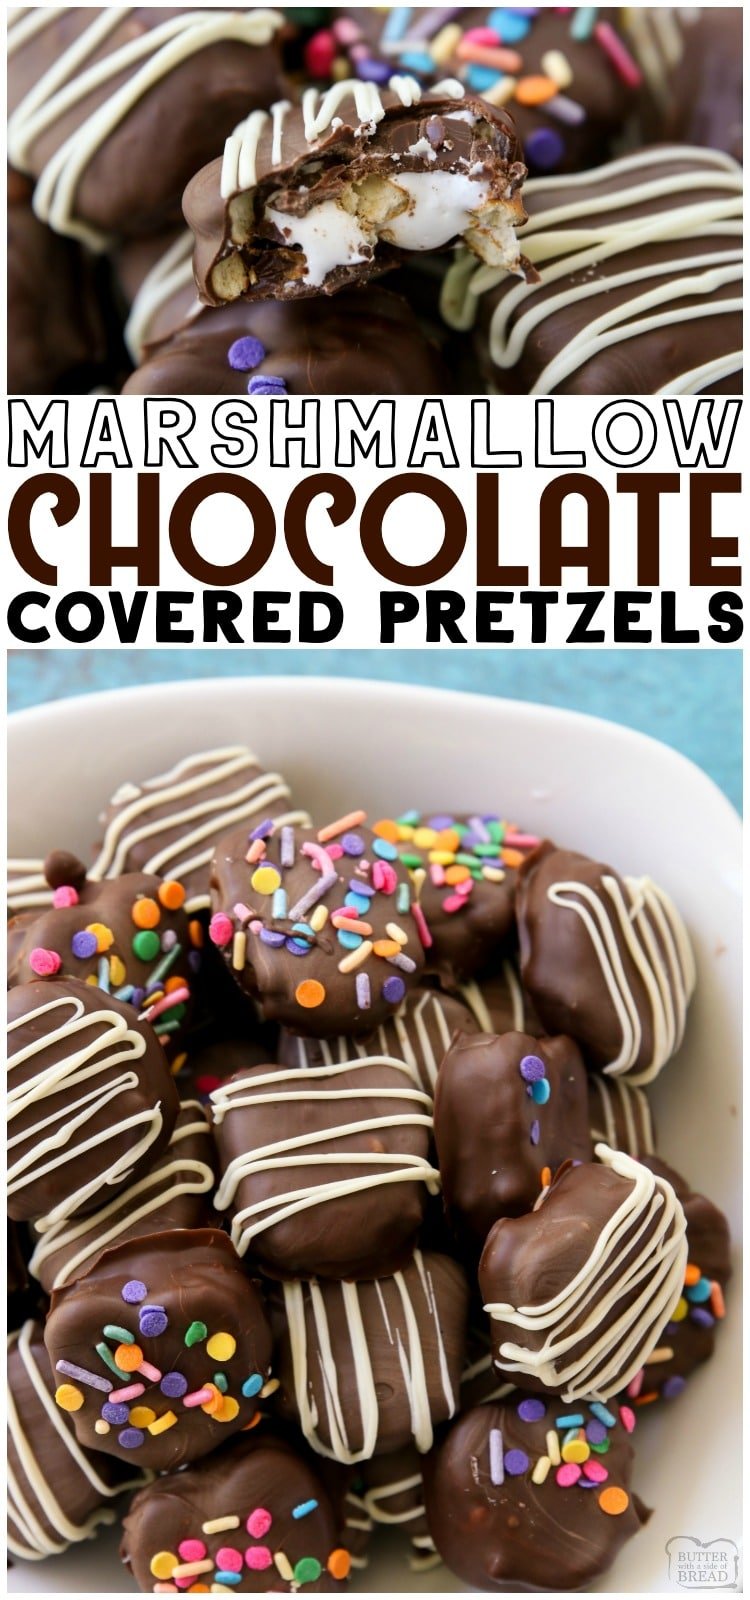 Chocolate Covered Pretzel recipe with marshmallow fluff filling are a delightful cross between s'mores and traditional chocolate pretzels. These chocolate dipped pretzels are easy to make and so delicious! #chocolate #pretzels #marshmallow #nobake #dessert from BUTTER WITH A SIDE OF BREAD